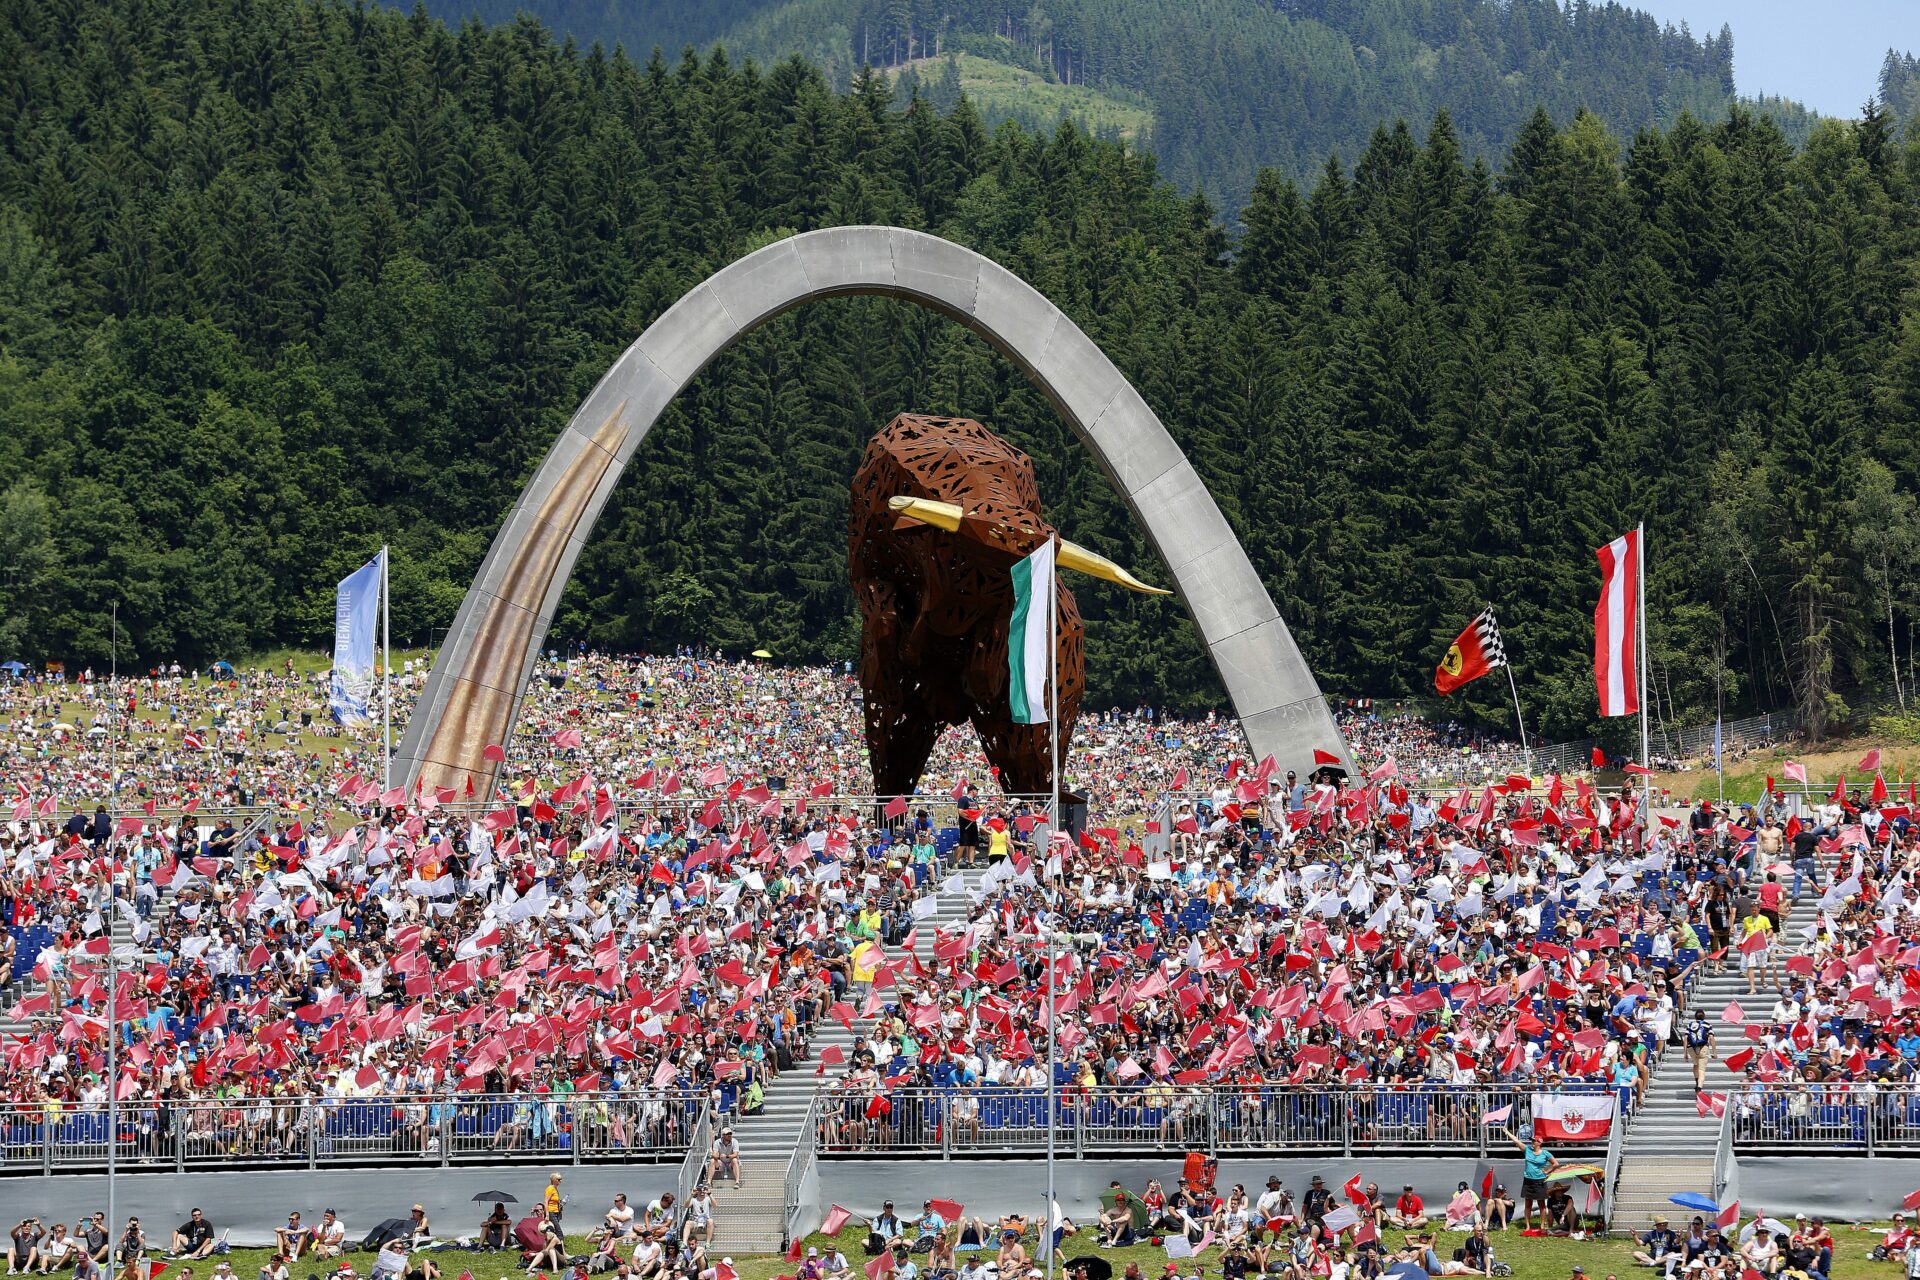 Giant bull statue in the centre of the Grand Stand in Speilberg